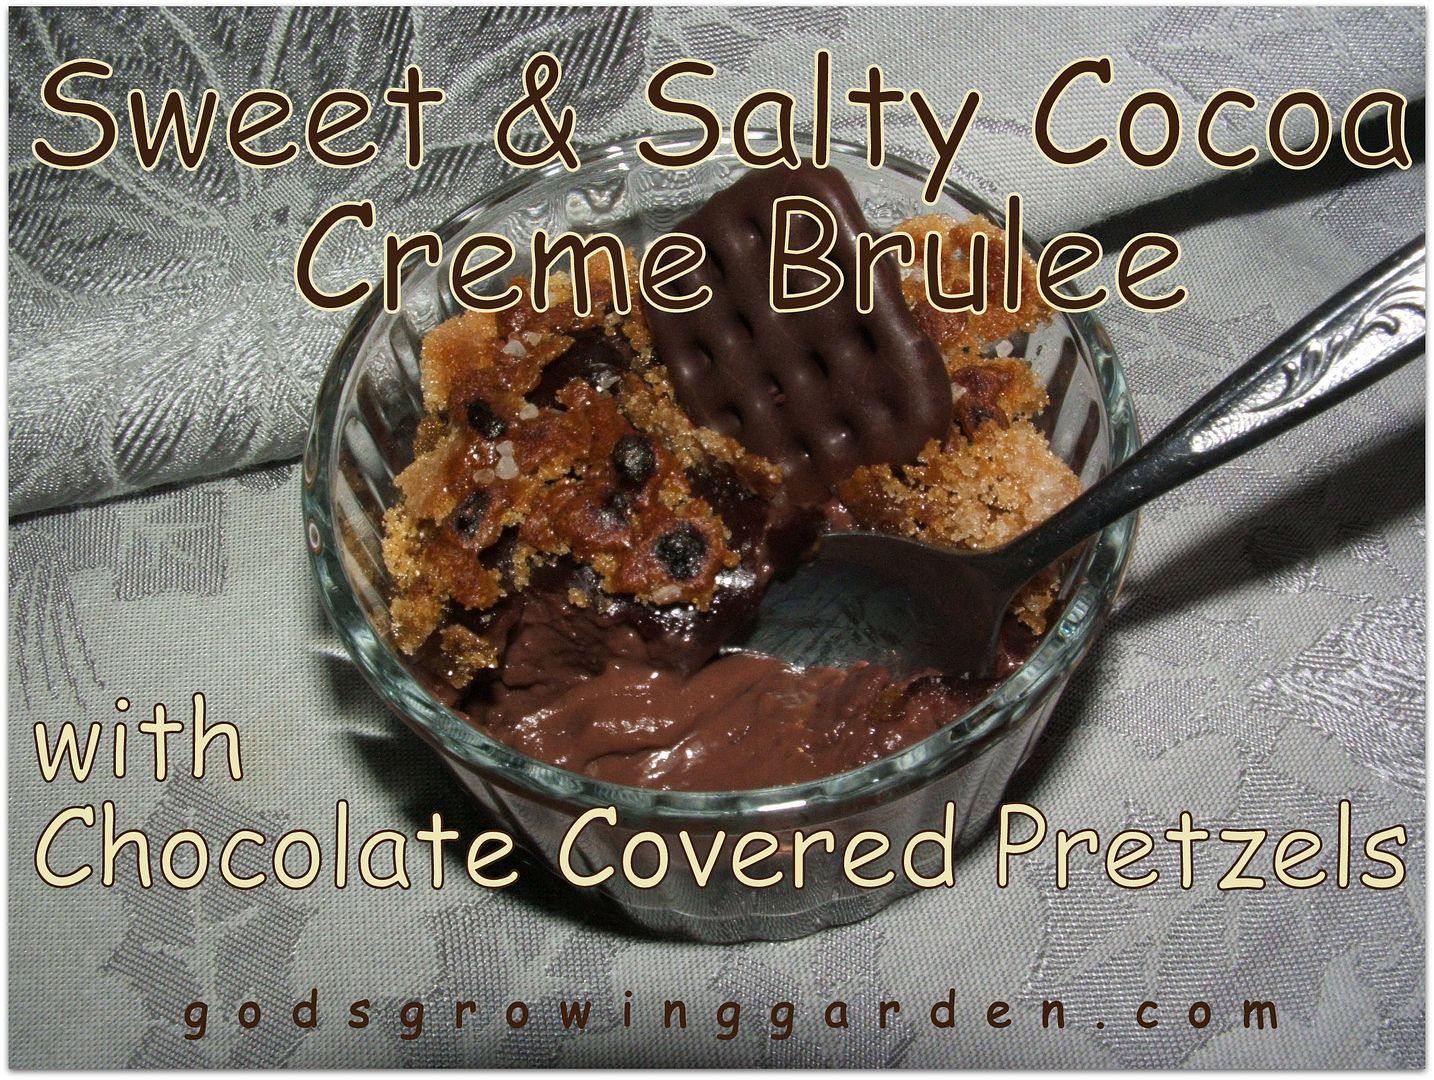 Sweet & Salty Cocoa Creme Brulee by Angie Ouellette-Tower for godsgrowinggarden.com photo 014_zps446112bd.jpg